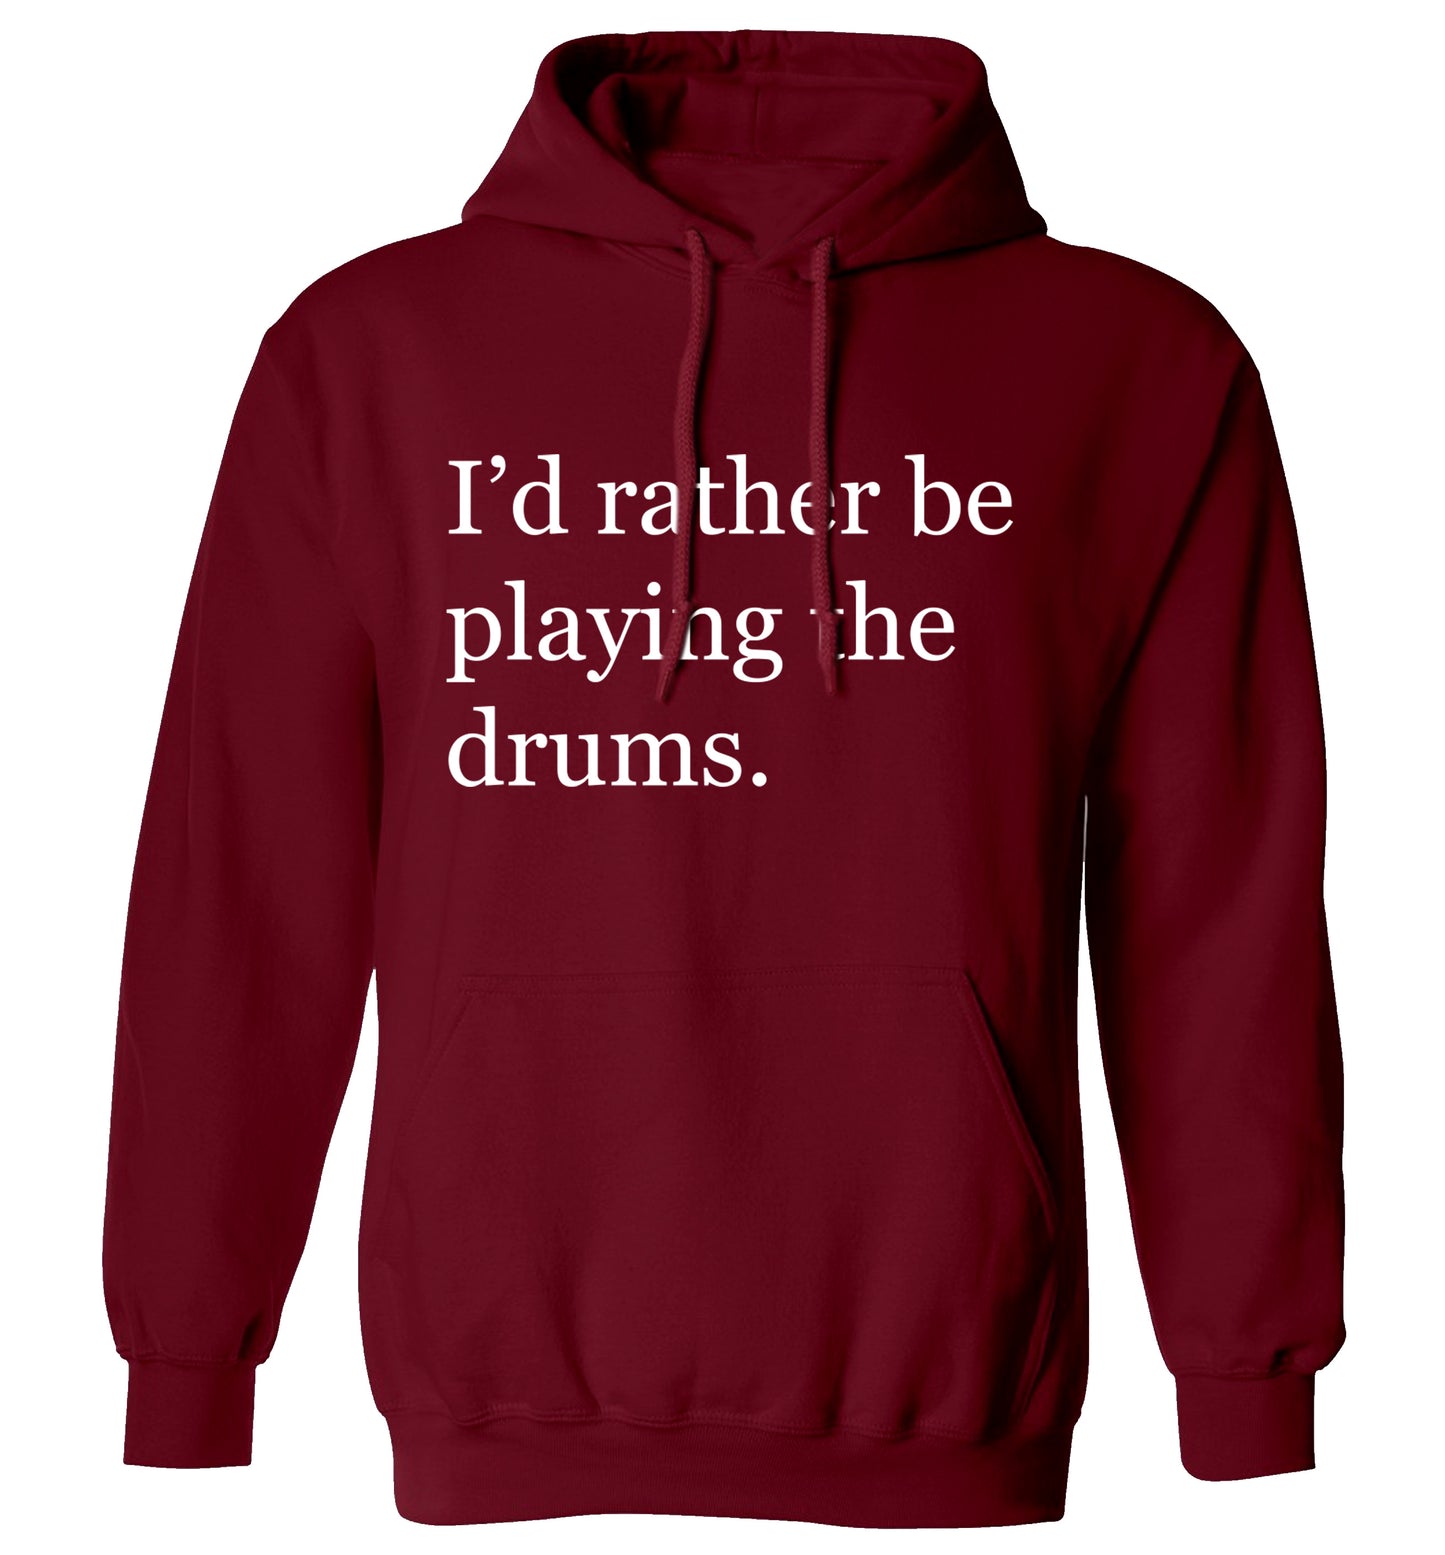 I'd rather be playing the drums adults unisexmaroon hoodie 2XL